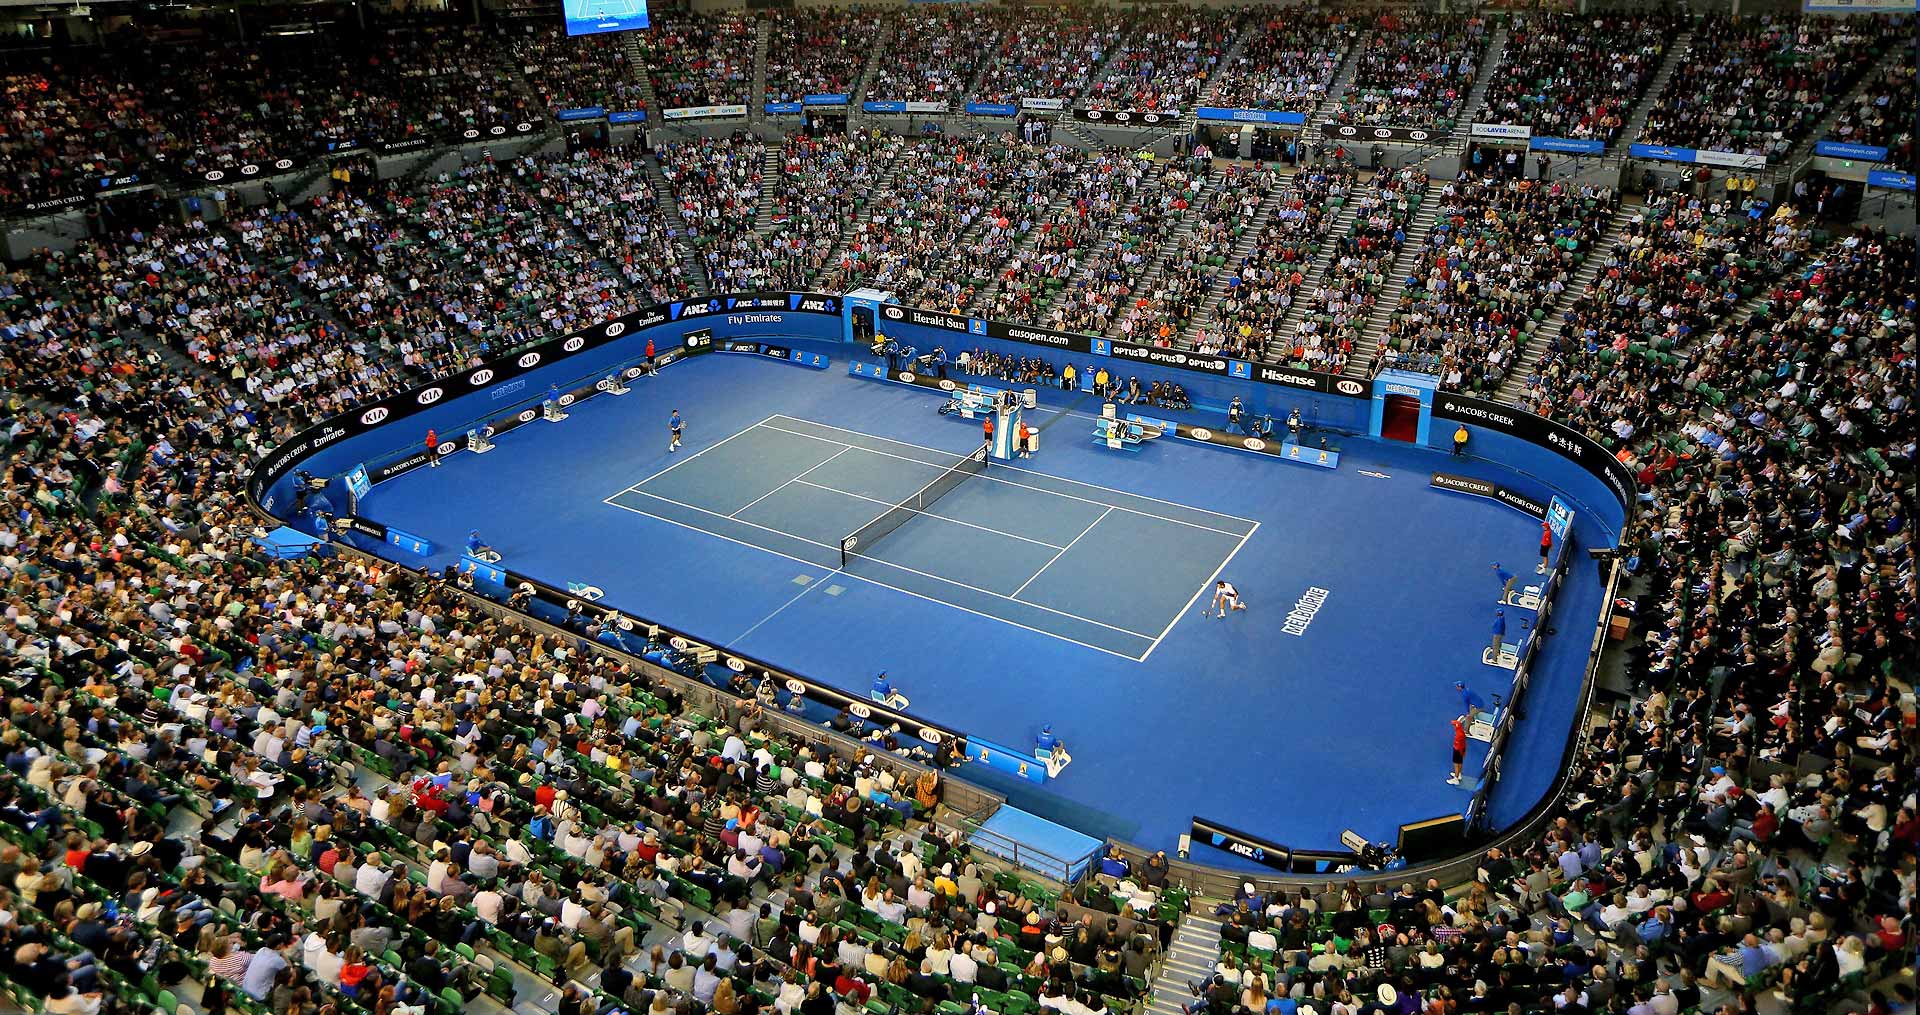 The Australian Open Tennis Event | The Complete 2020 & 2021 Guide by CHARTERWORLD